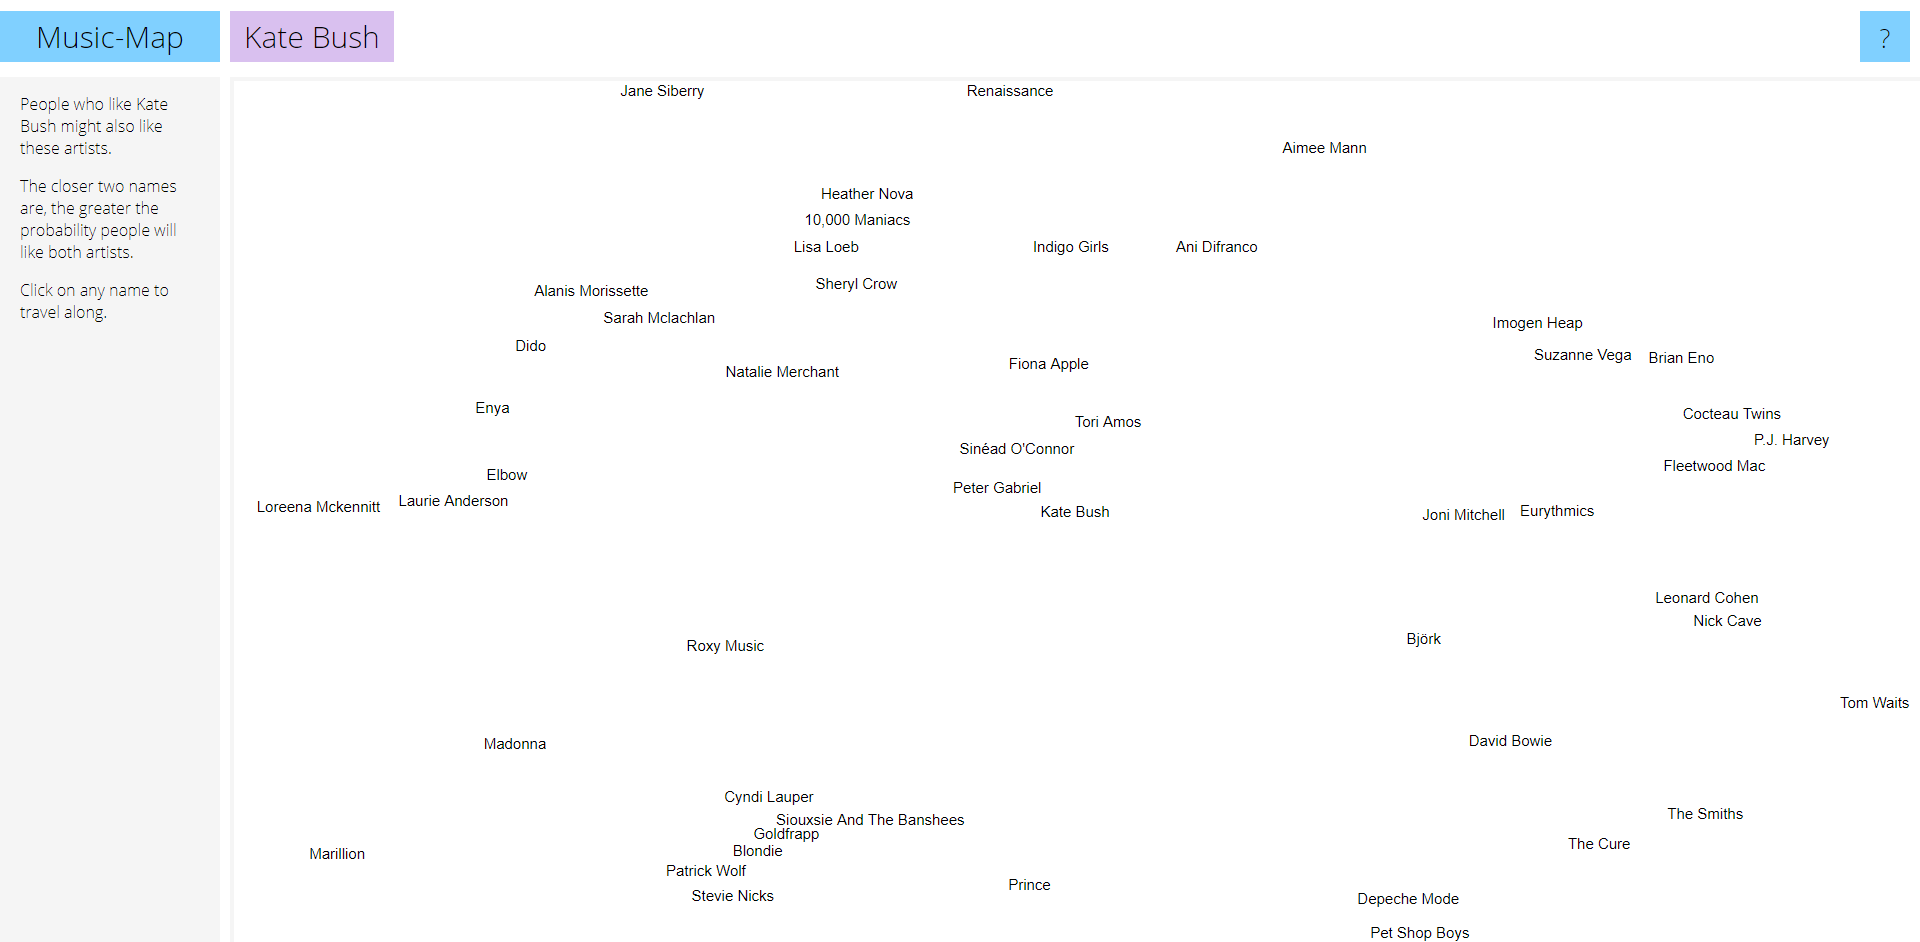 This map takes you to artists you will love based on music you already do